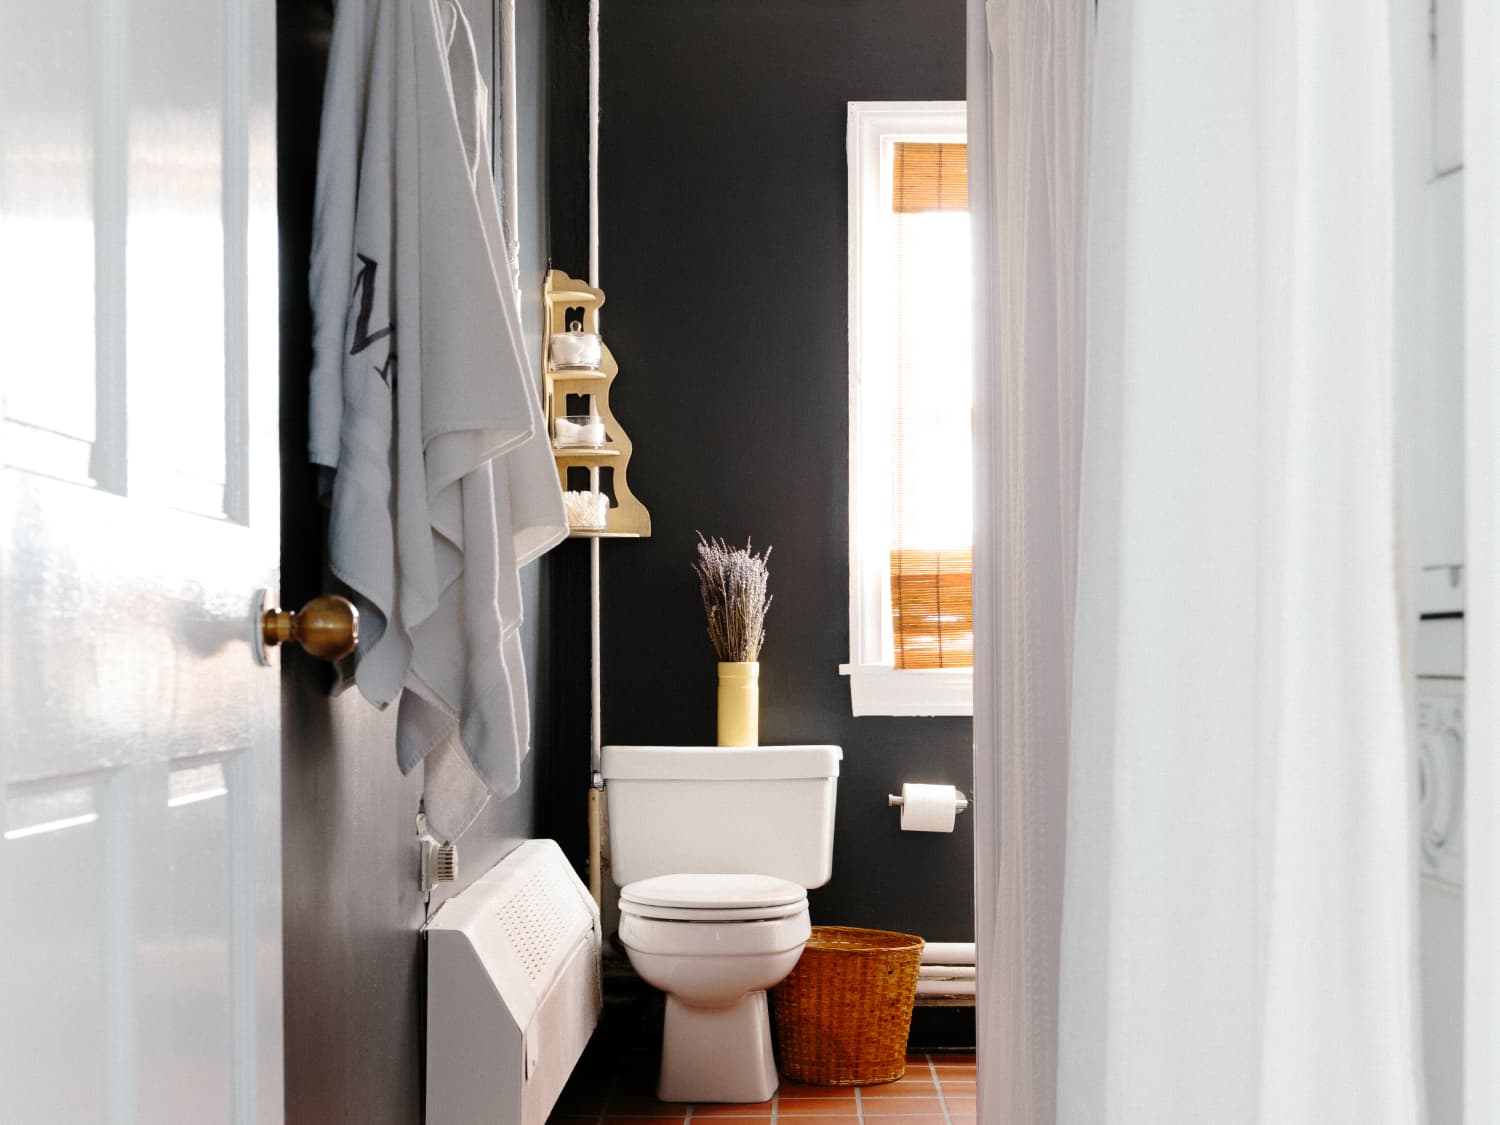 How To Clean Toilet Brushes And Brush Holders? - Bond Cleaning In Melbourne